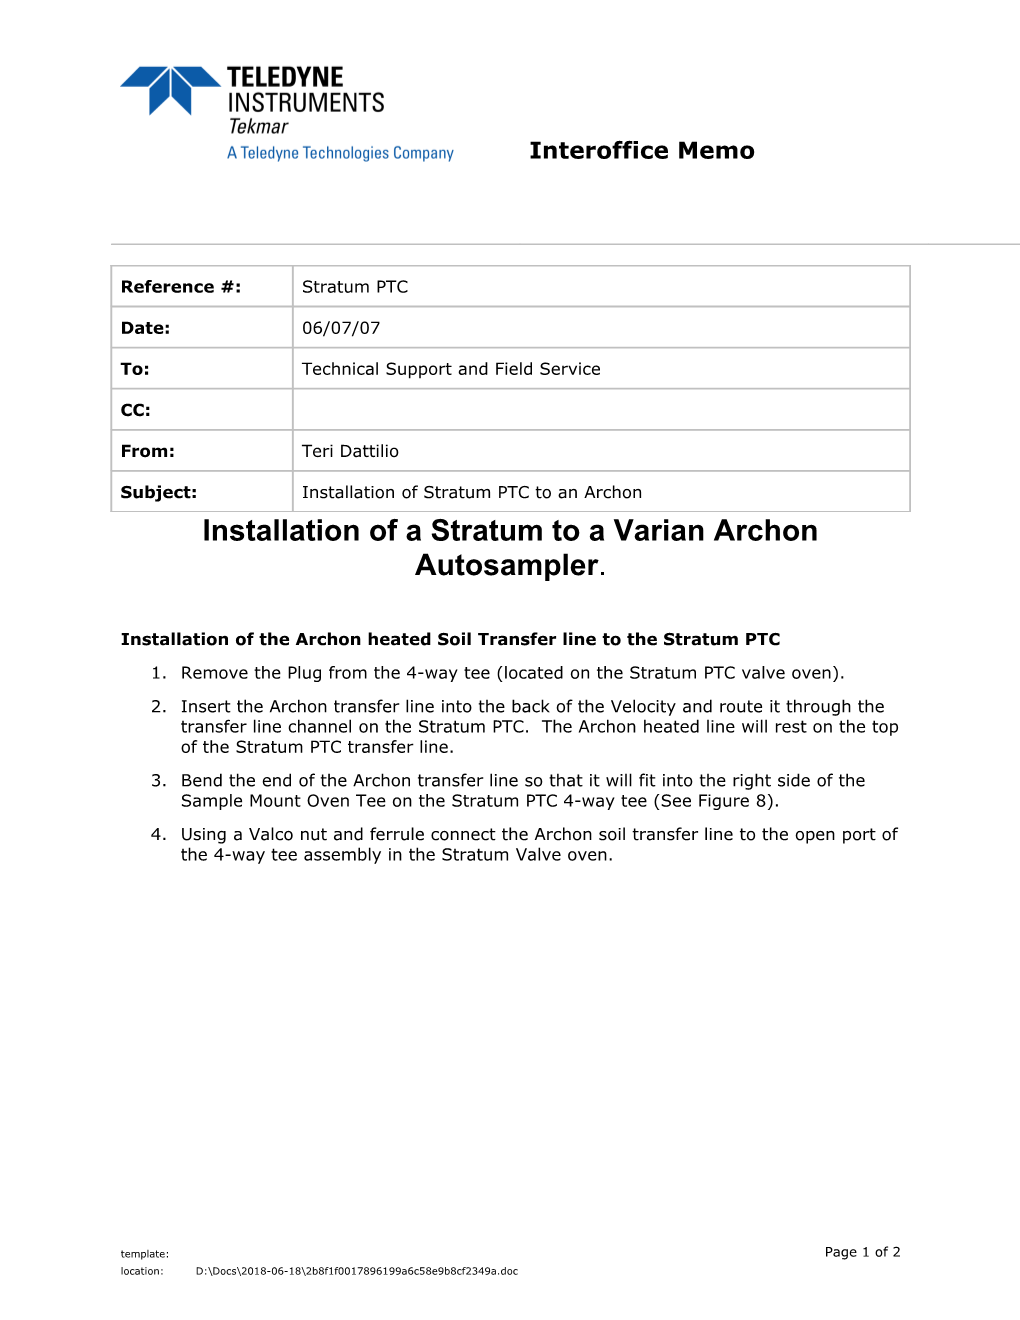 Installation of a Stratum to a Varian Archon Autosampler